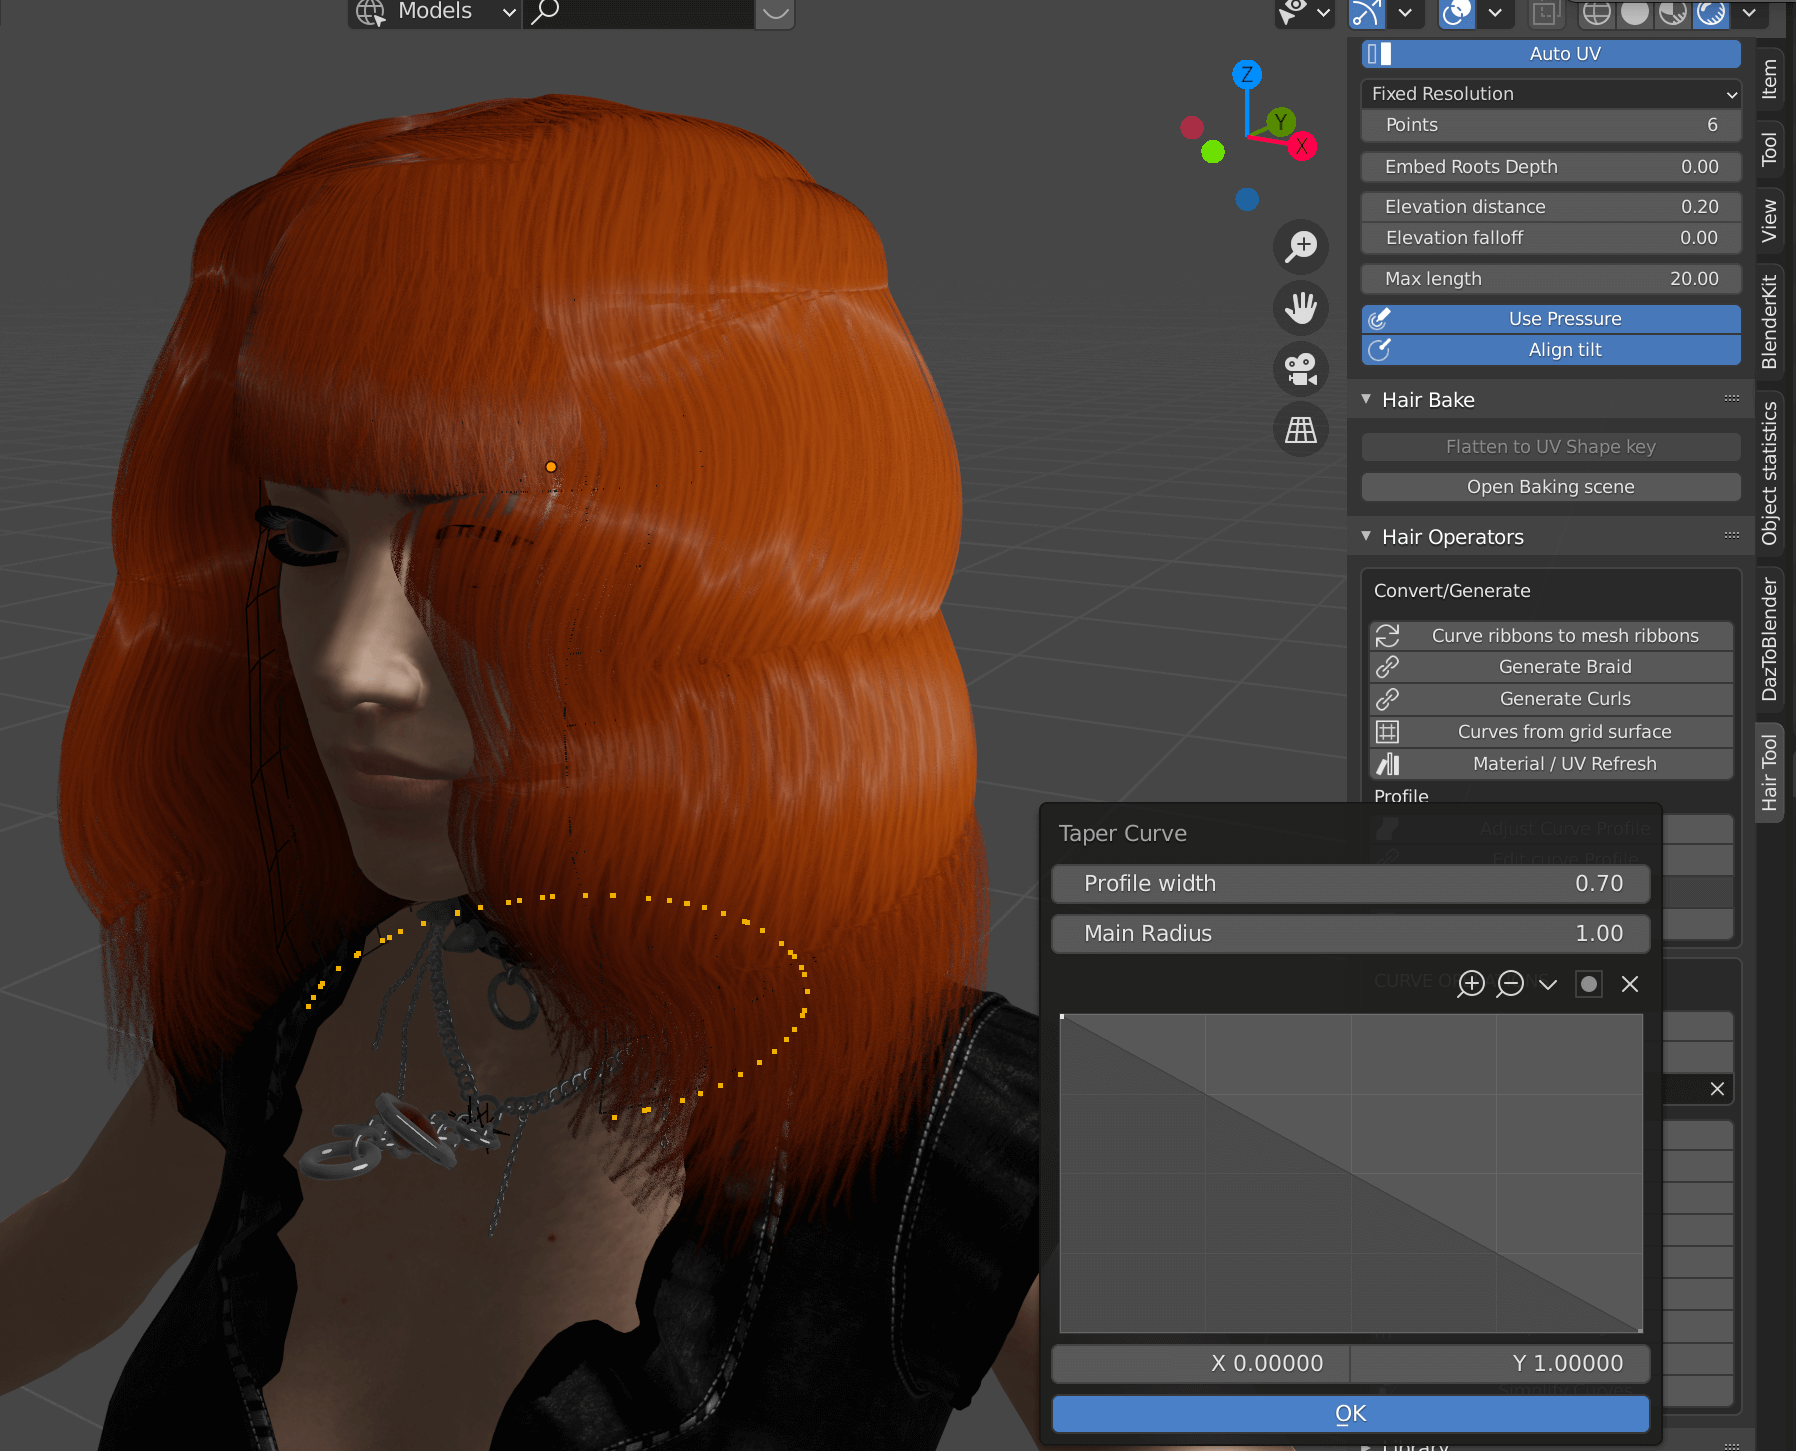 DAZ Studio] (3) Making hair with Hair Tool for Blender (first half) | STYLY